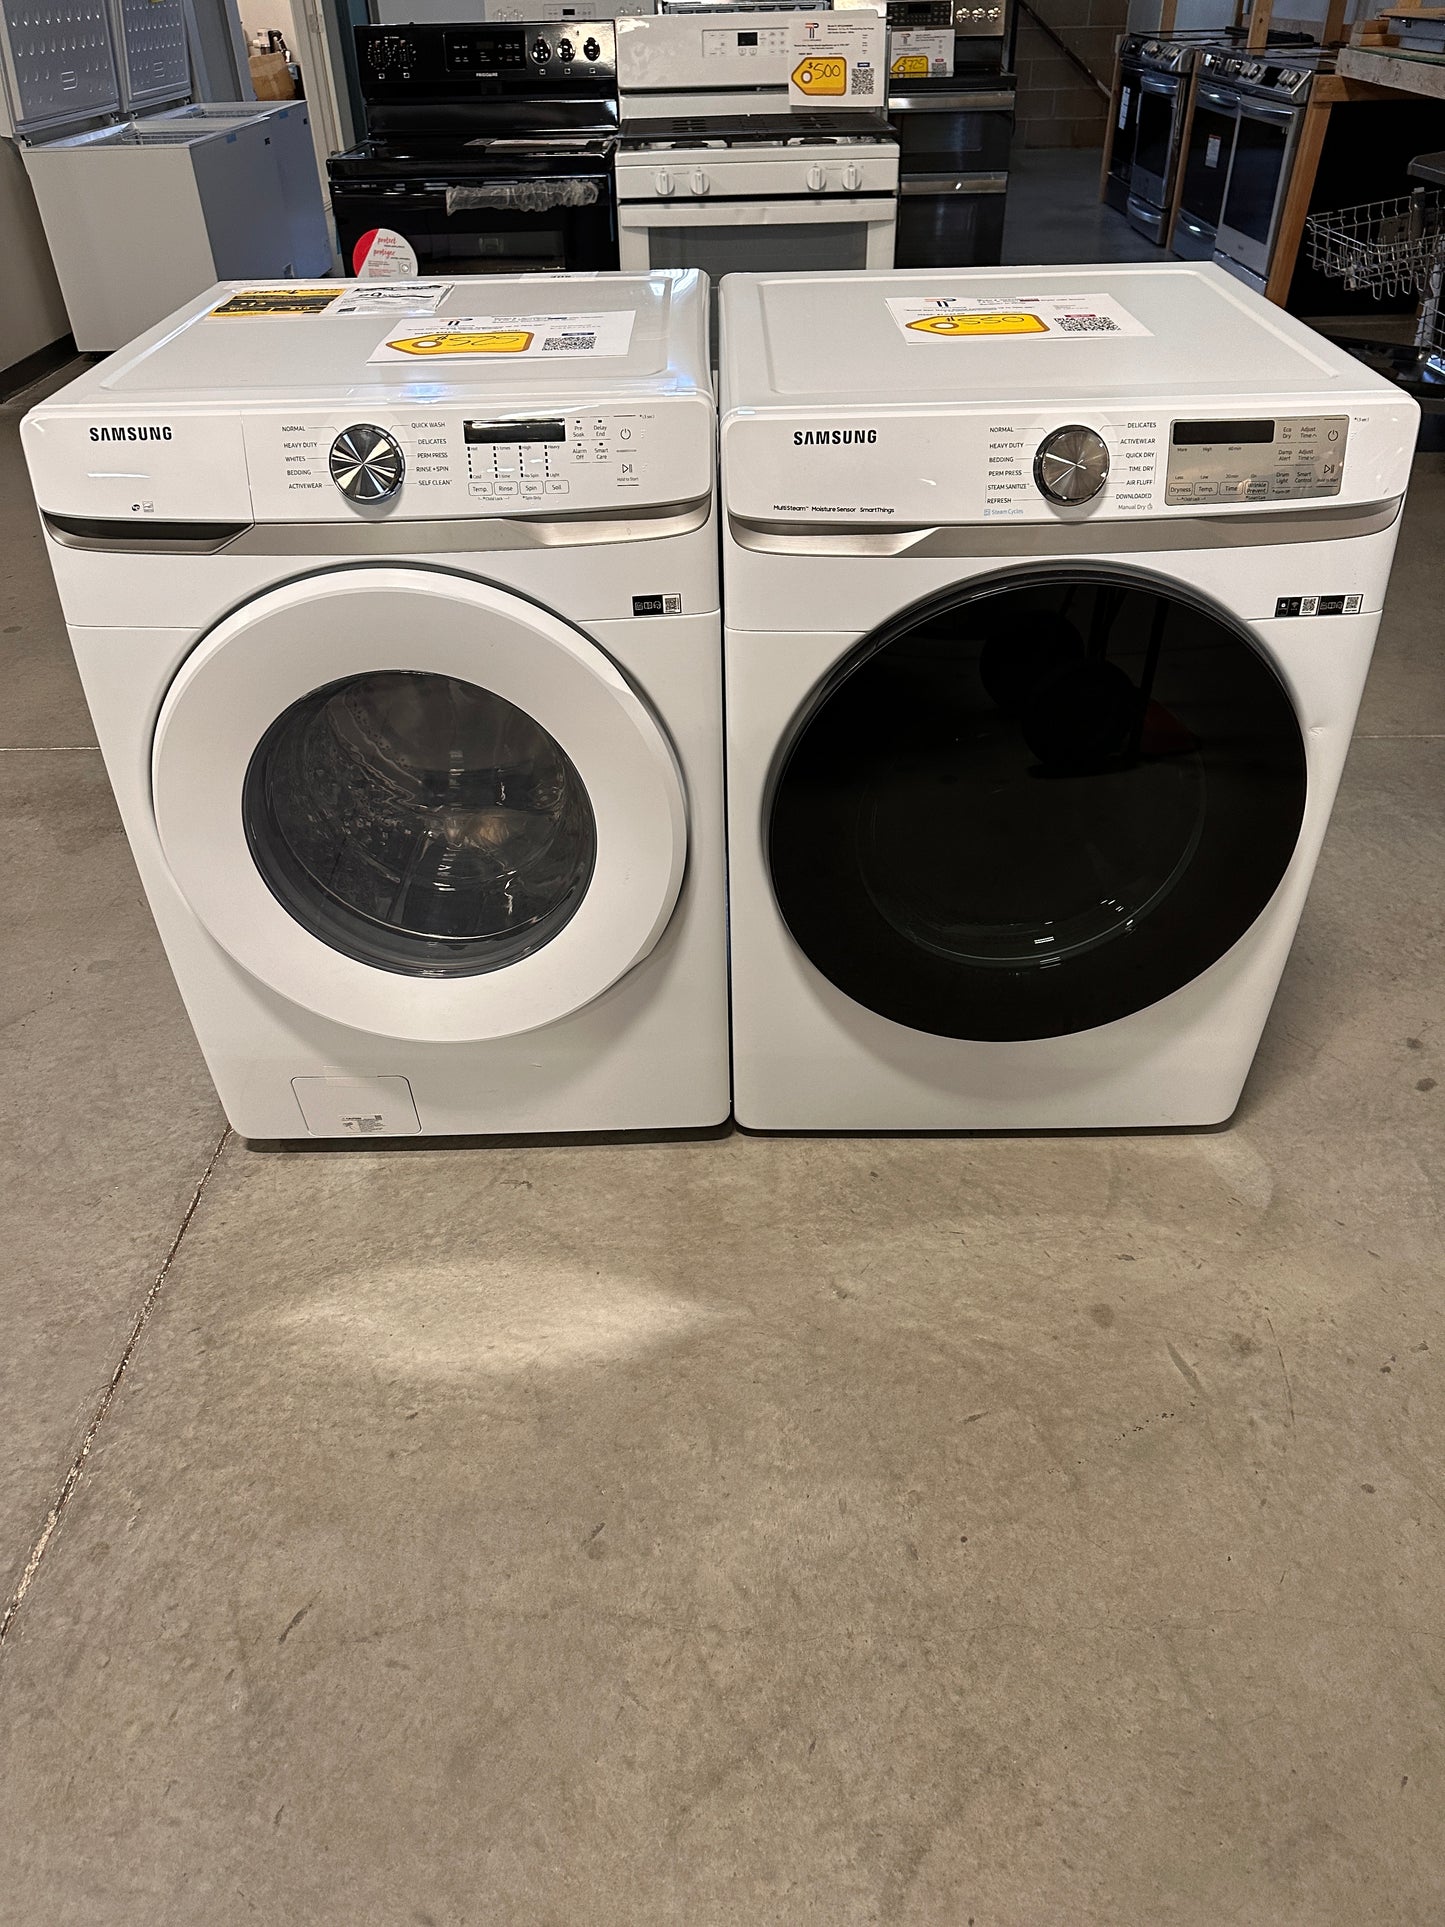 GREAT NEW SAMSUNG STACKABLE LAUNDRY SET - ELECTRIC DRYER - DRY12347 WAS13047